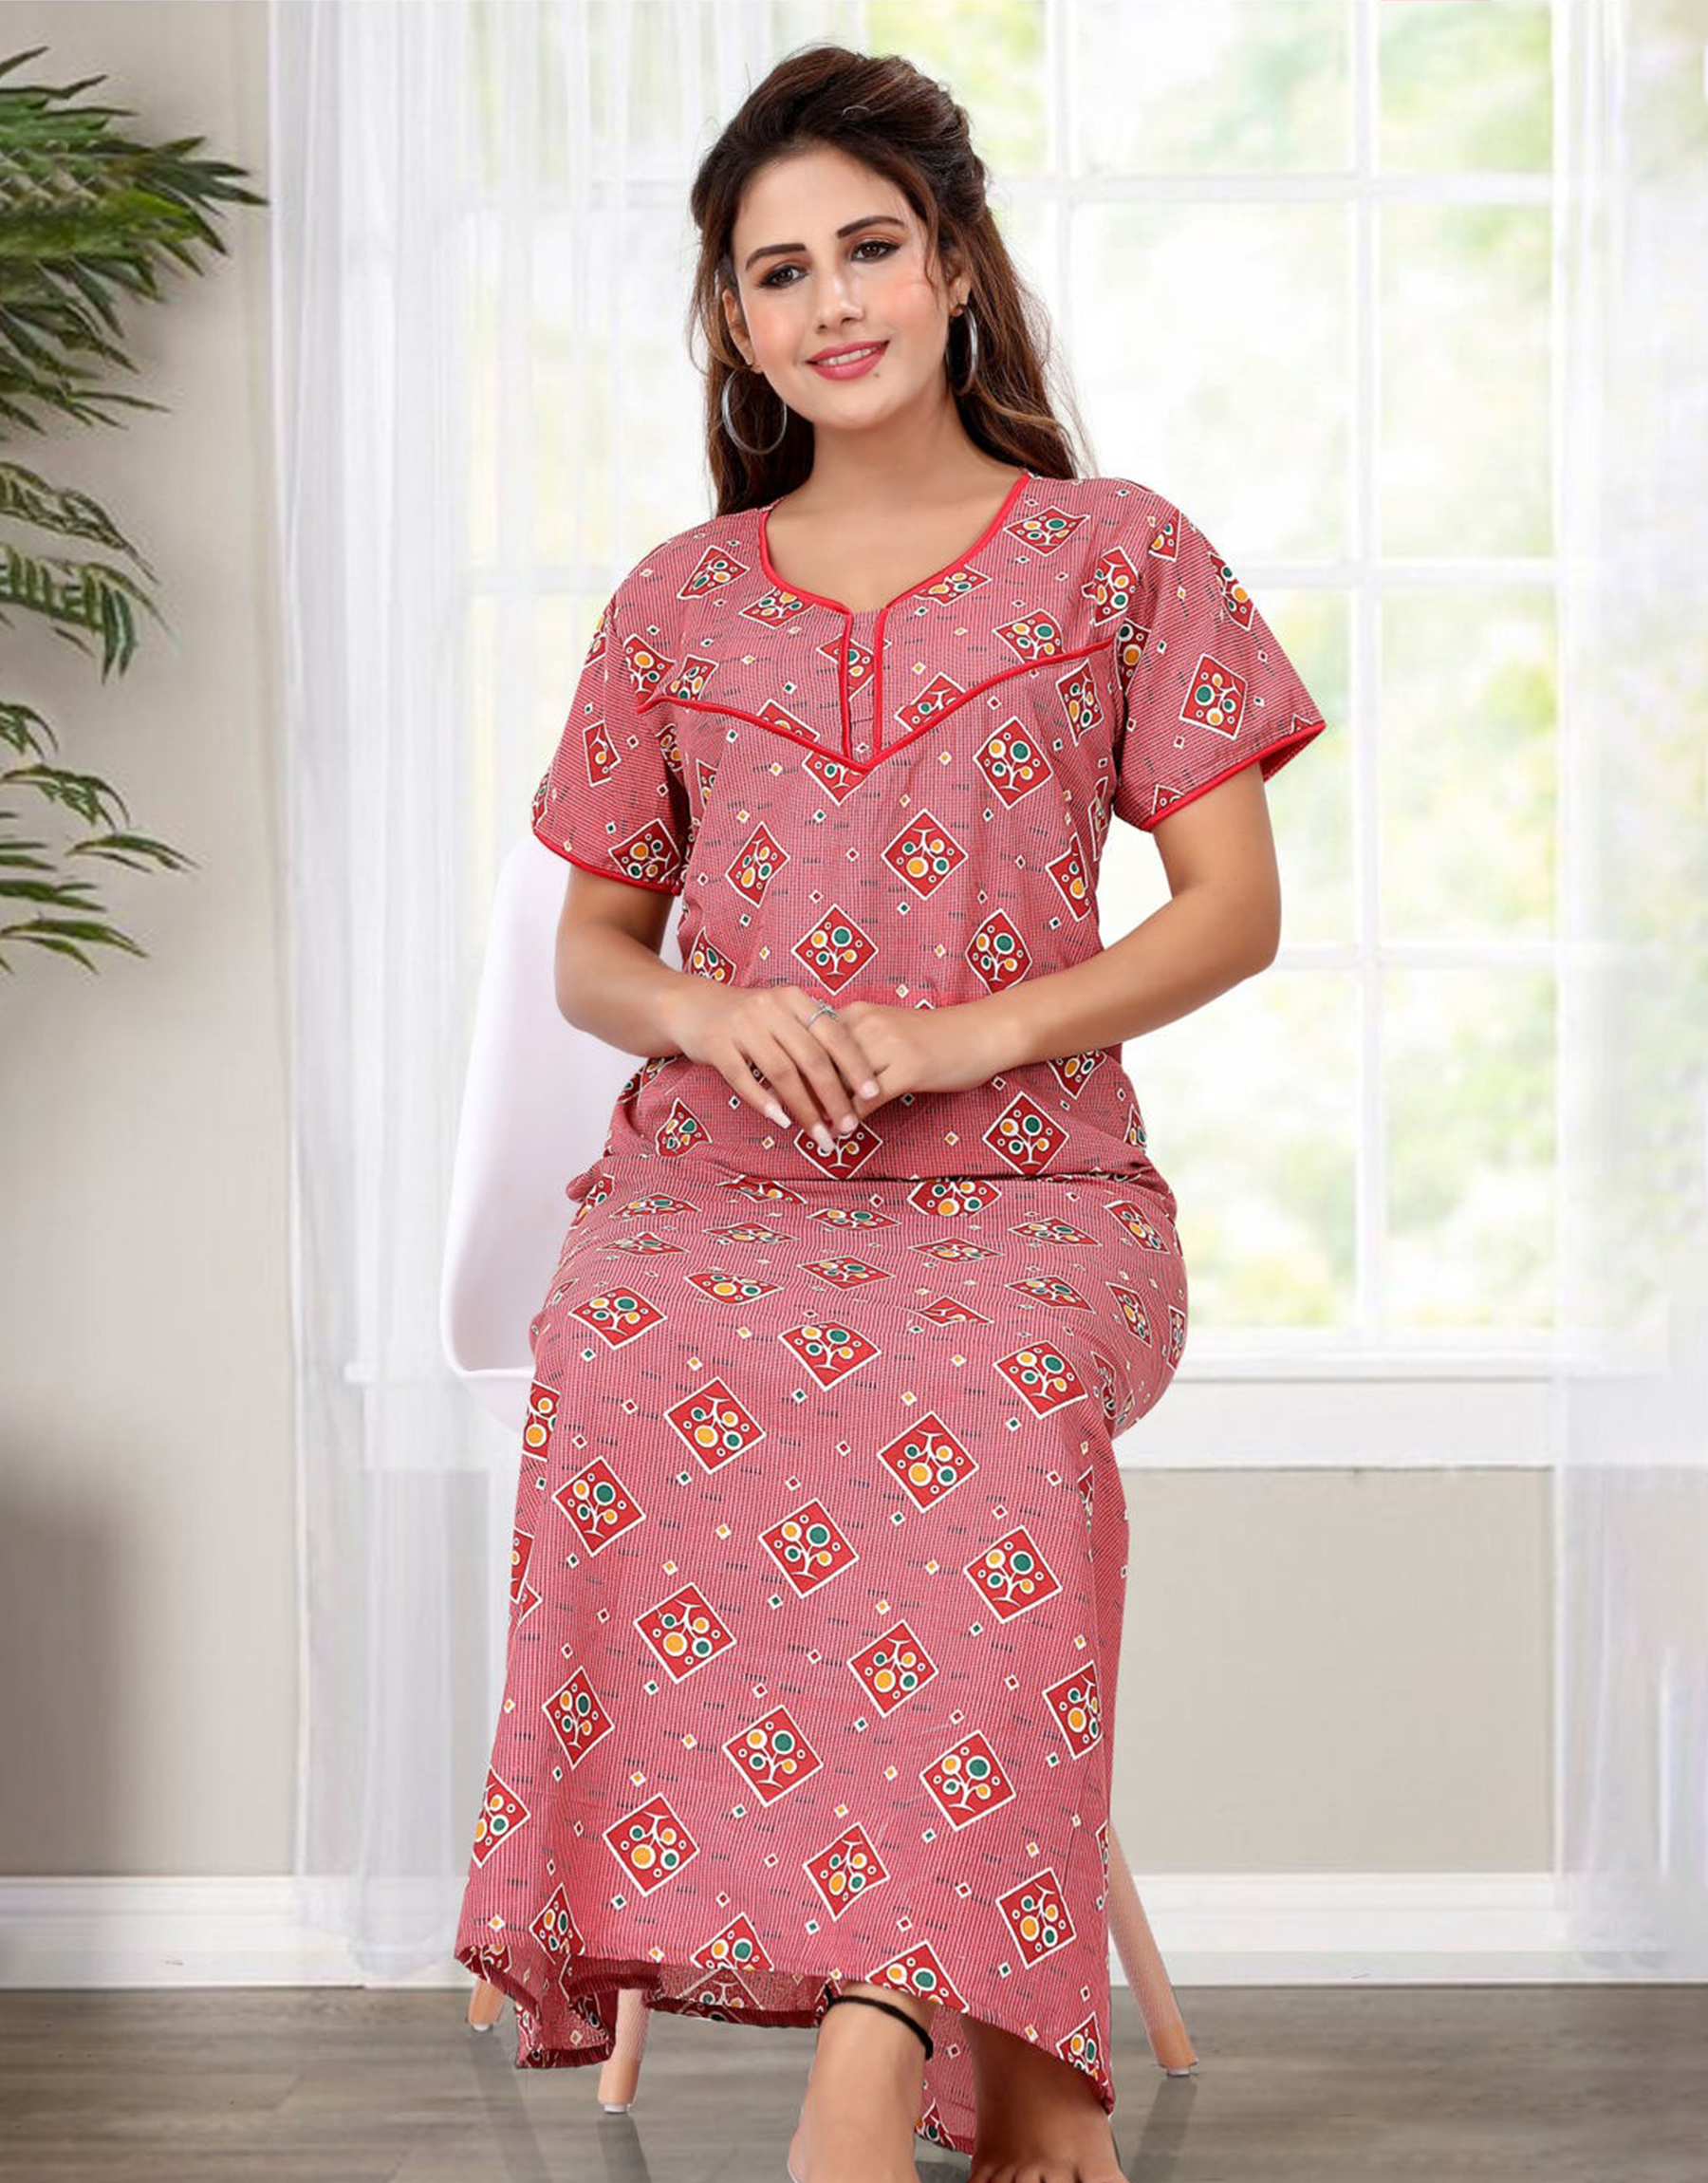 Ladies Night Gown Latest Price, Ladies Night Gown Supplier in Jetpur, India